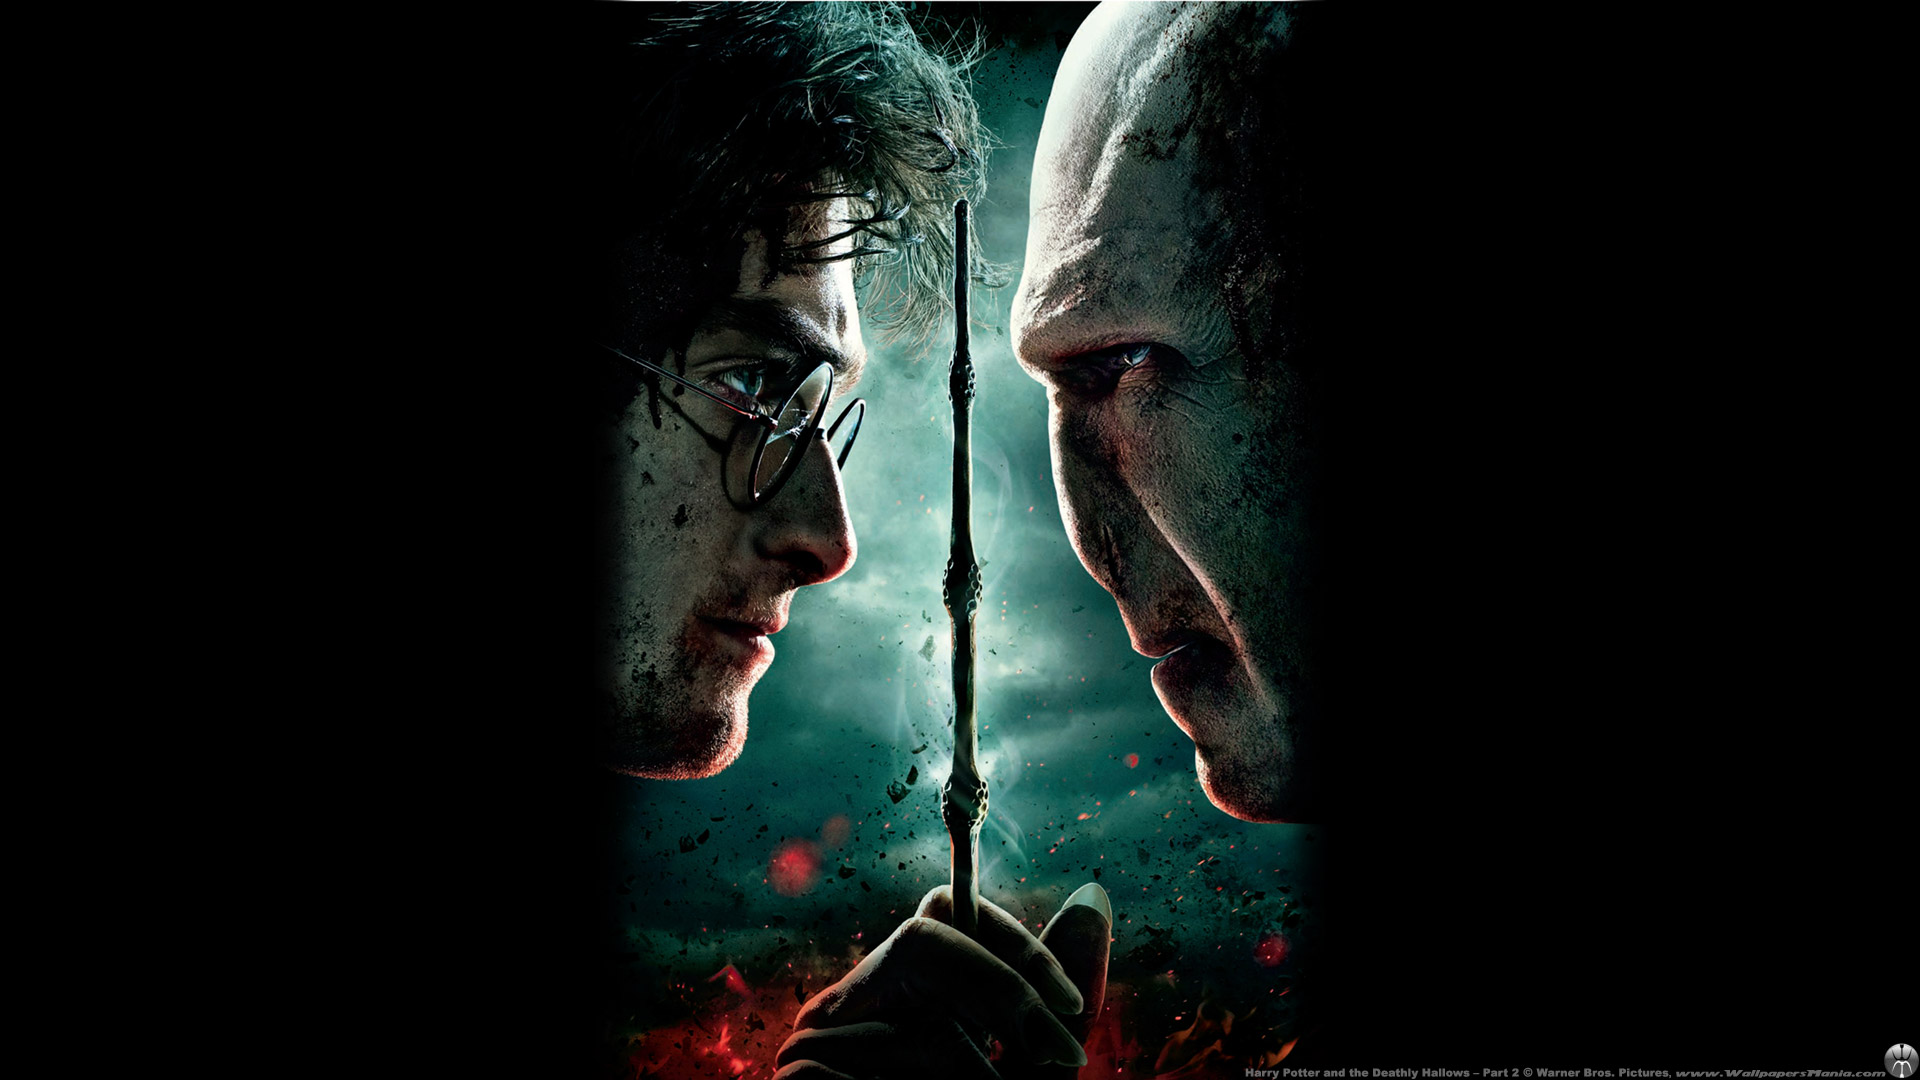 Pin Lord Voldemort Wallpaper For Imac Widescreen Hd Wallpapers on